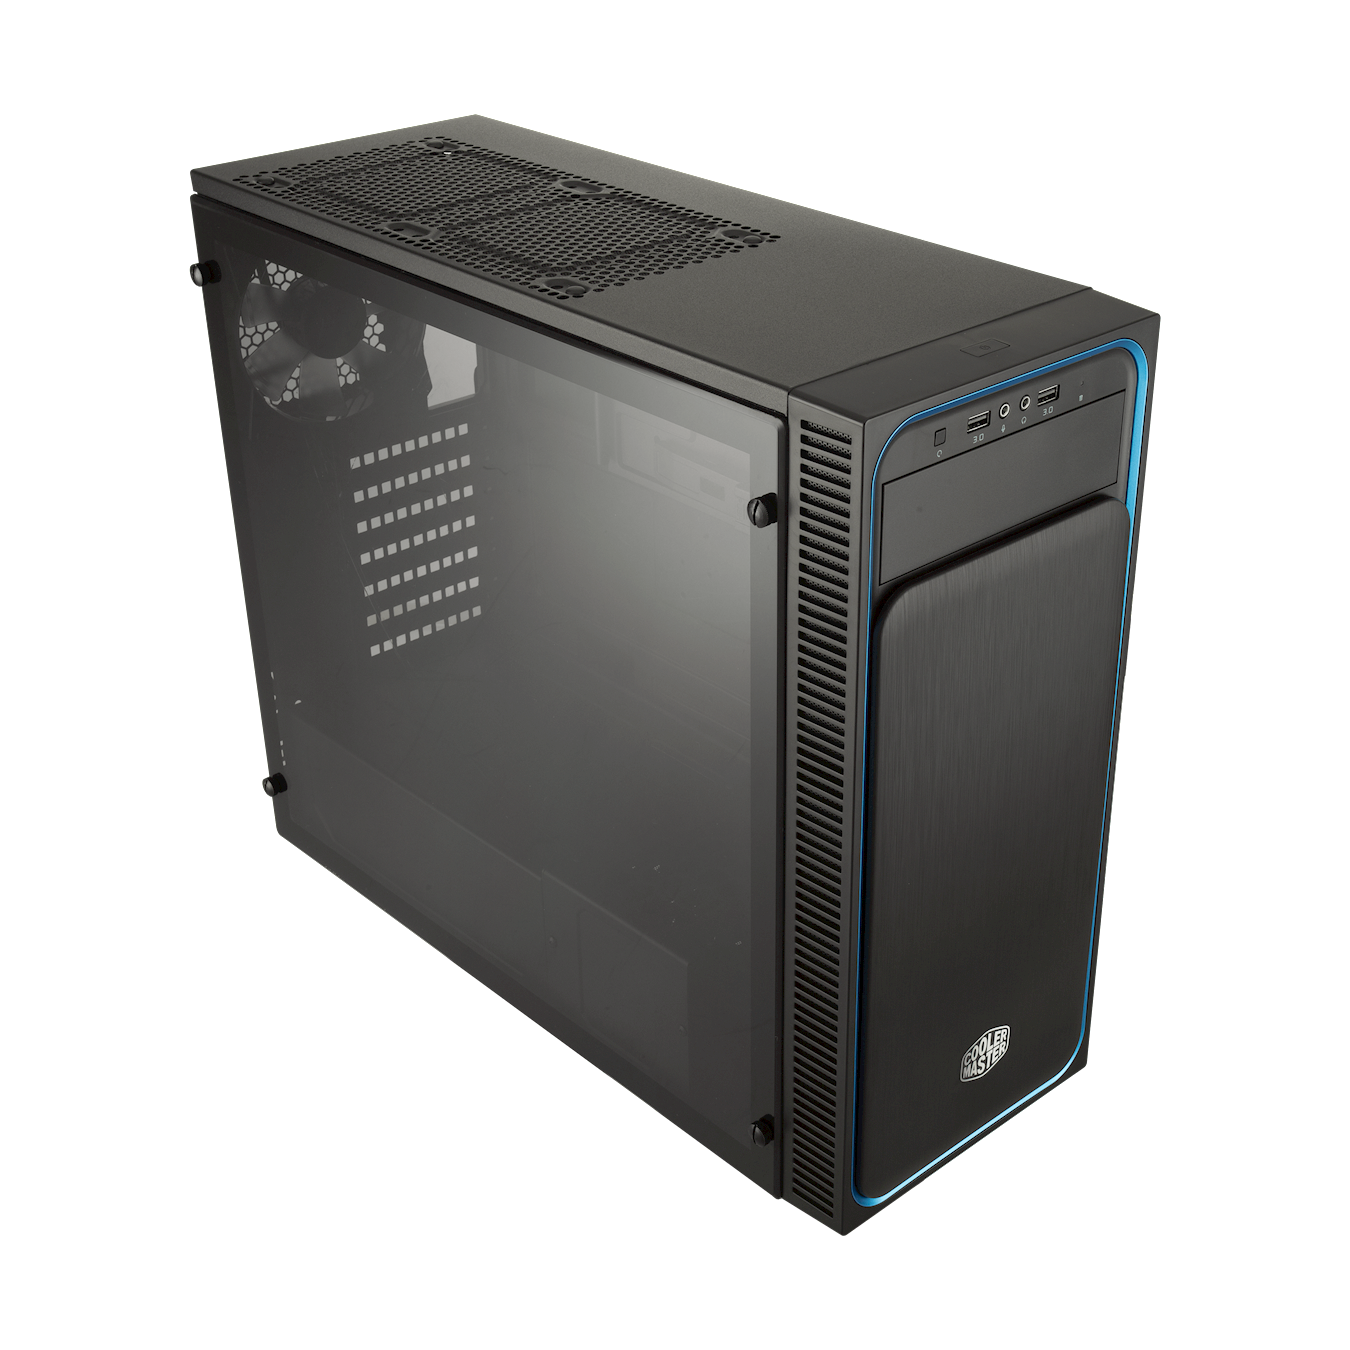 MasterBox E500L (Side Window Panel Version) Mid Tower Case - Keep a clean design and hide your I/O ports behind this smooth front slide panel.